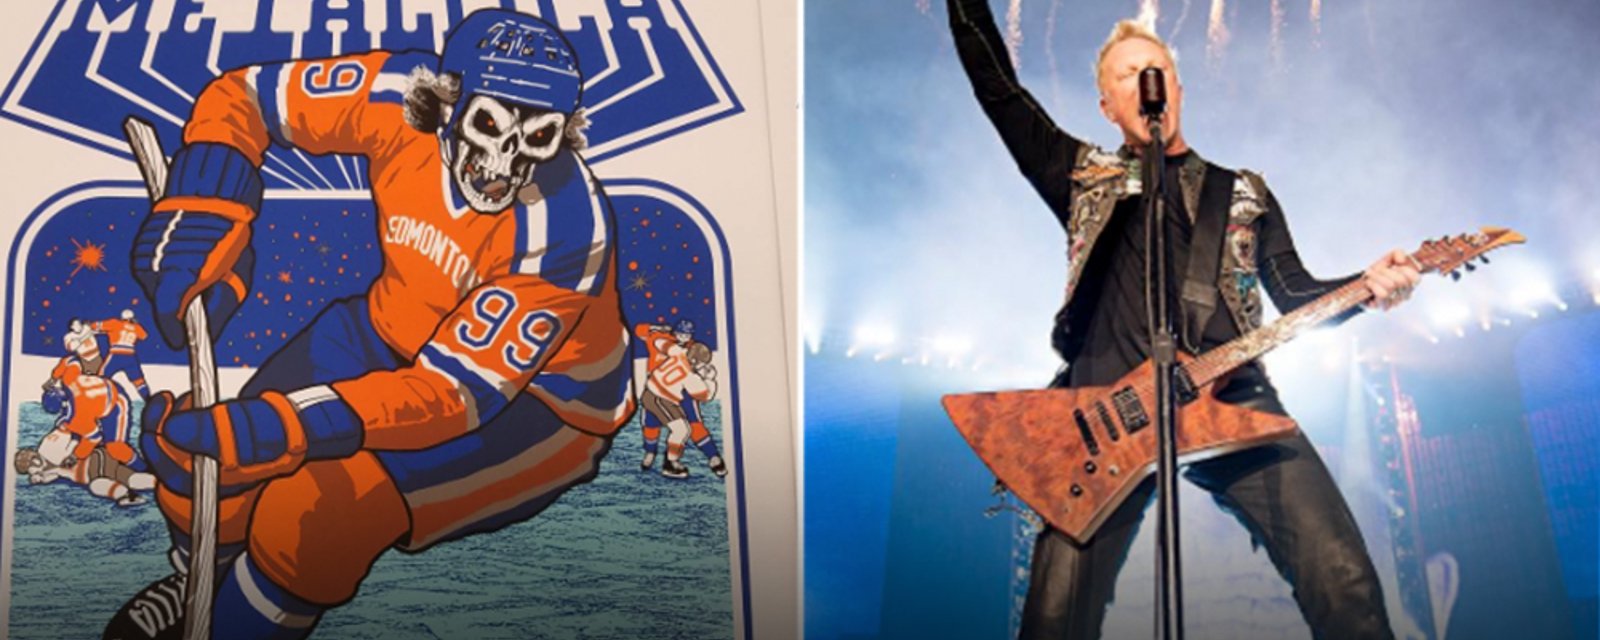 Must See: Incredible Gretzky poster from last night’s Metallica concert in Edmonton